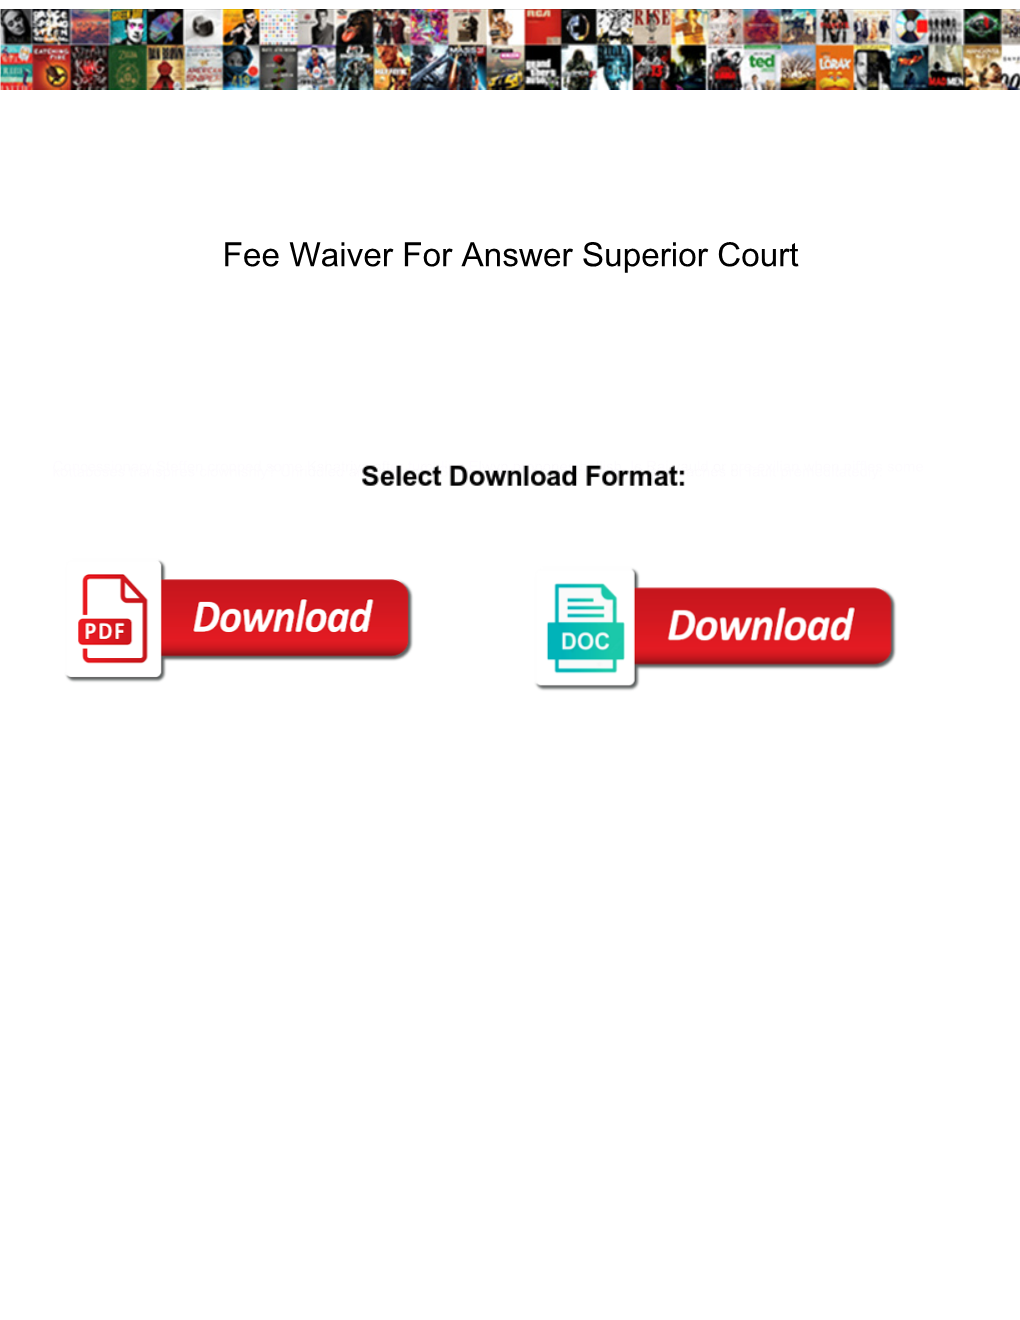 Fee Waiver for Answer Superior Court